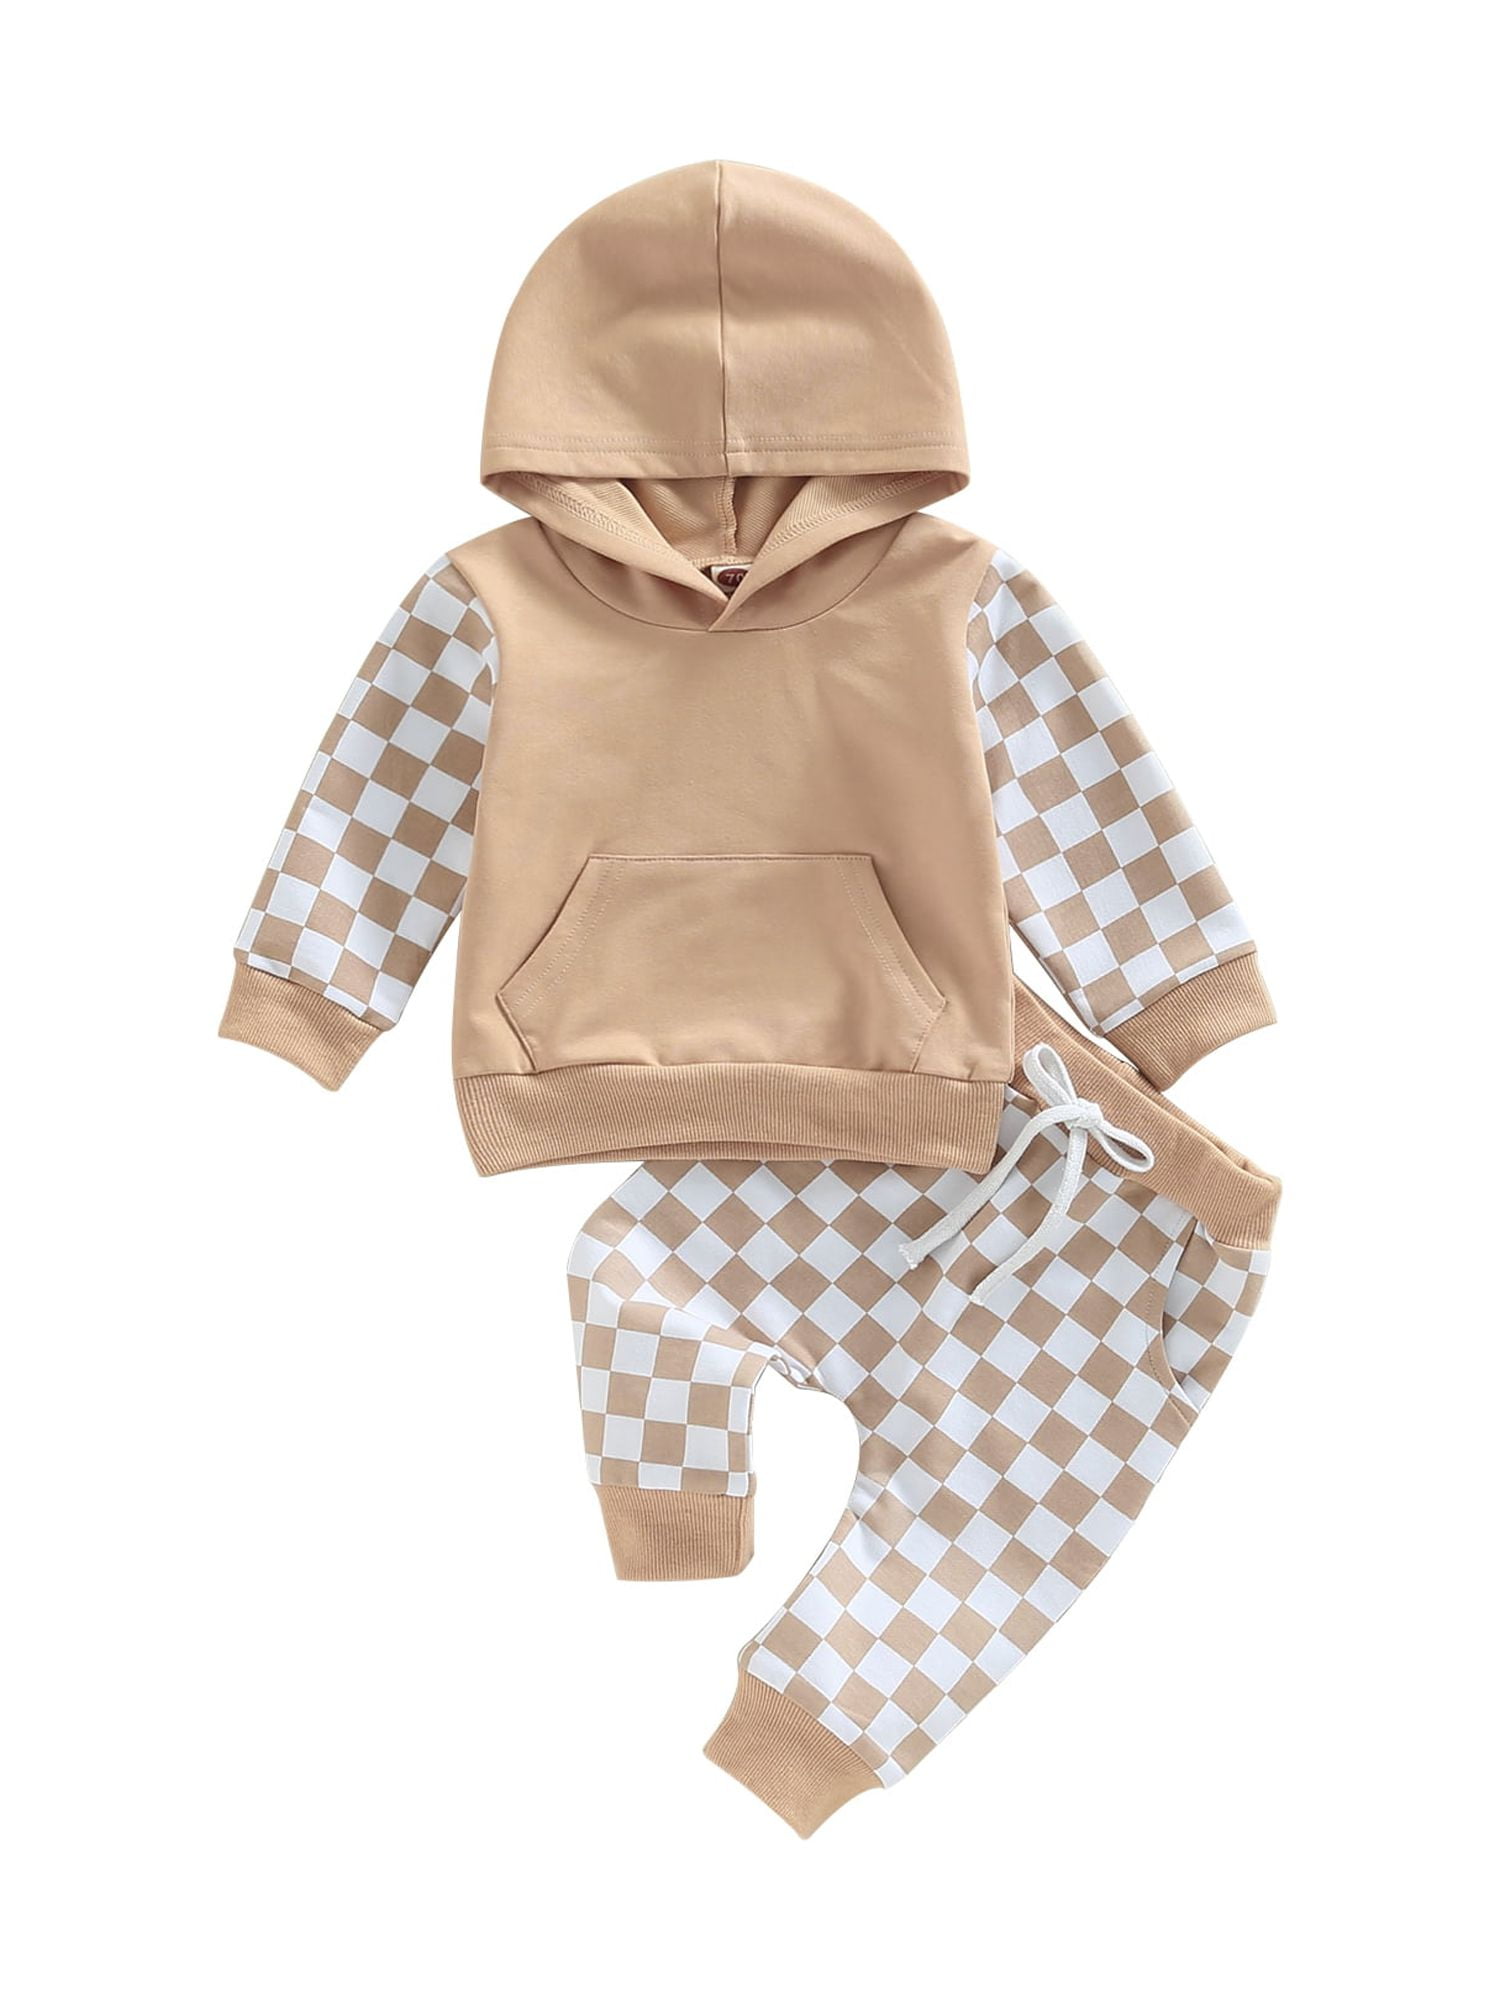 2pcs Baby Infant Boys Casual Checkerboard Long Sleeve Onesie Pants